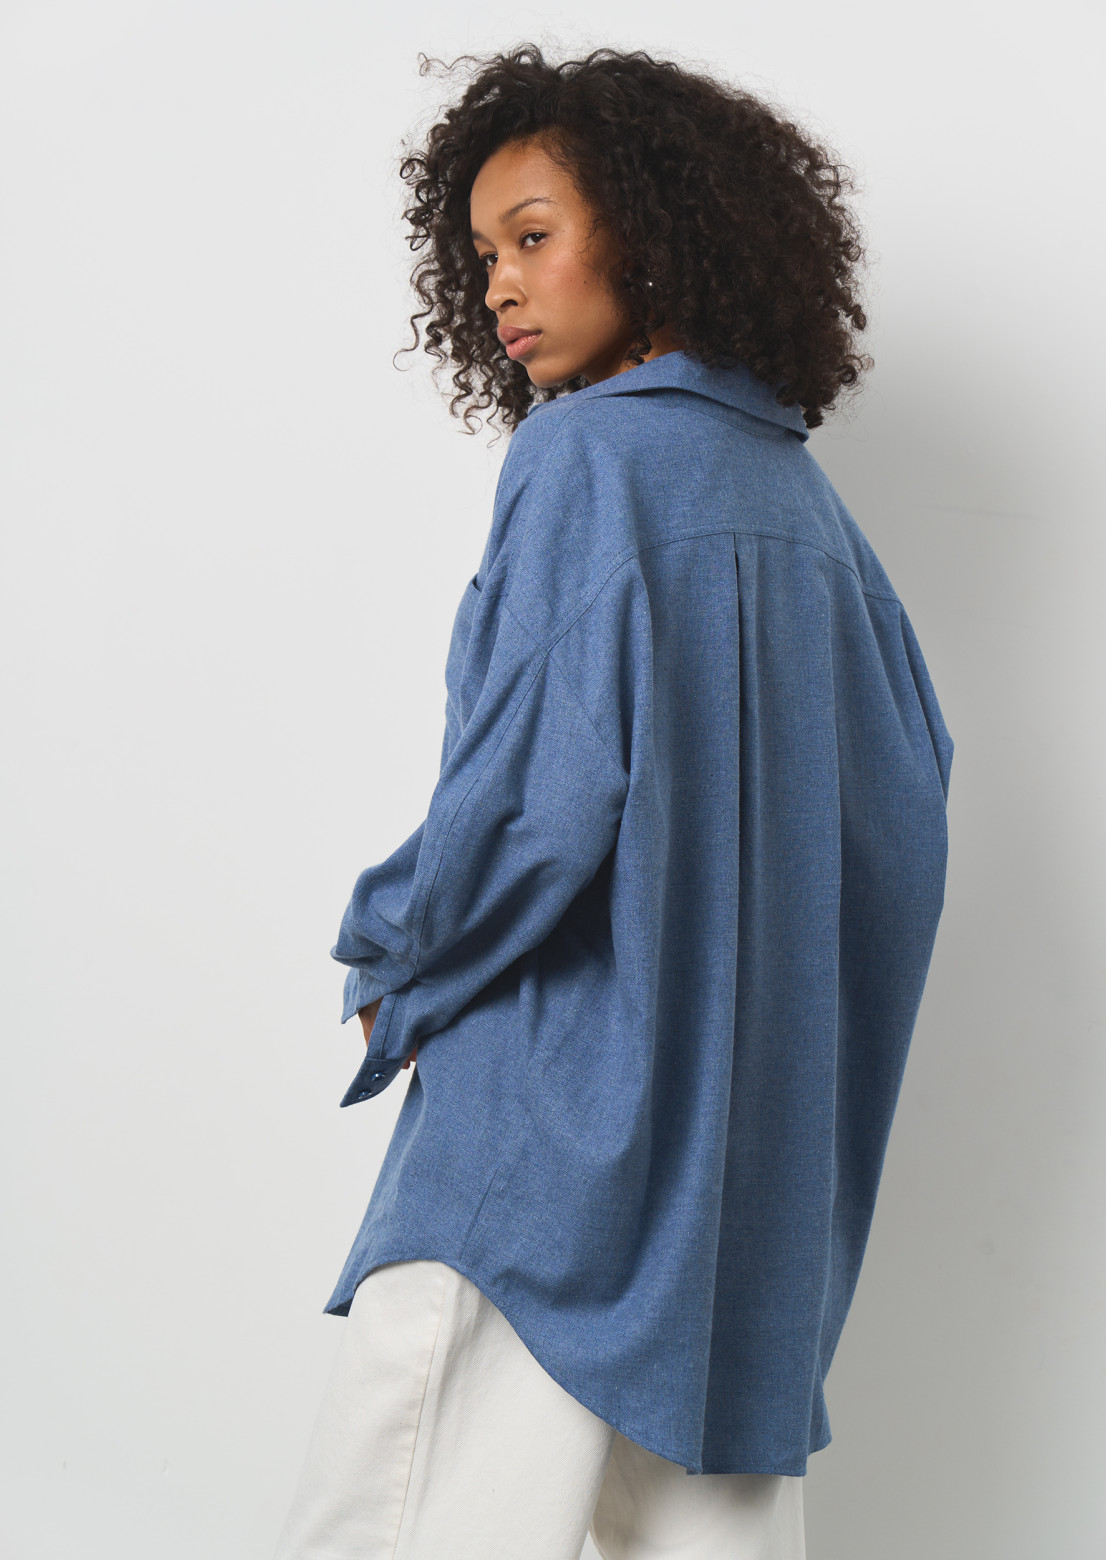 Jeans shirt with voluminous sleeves